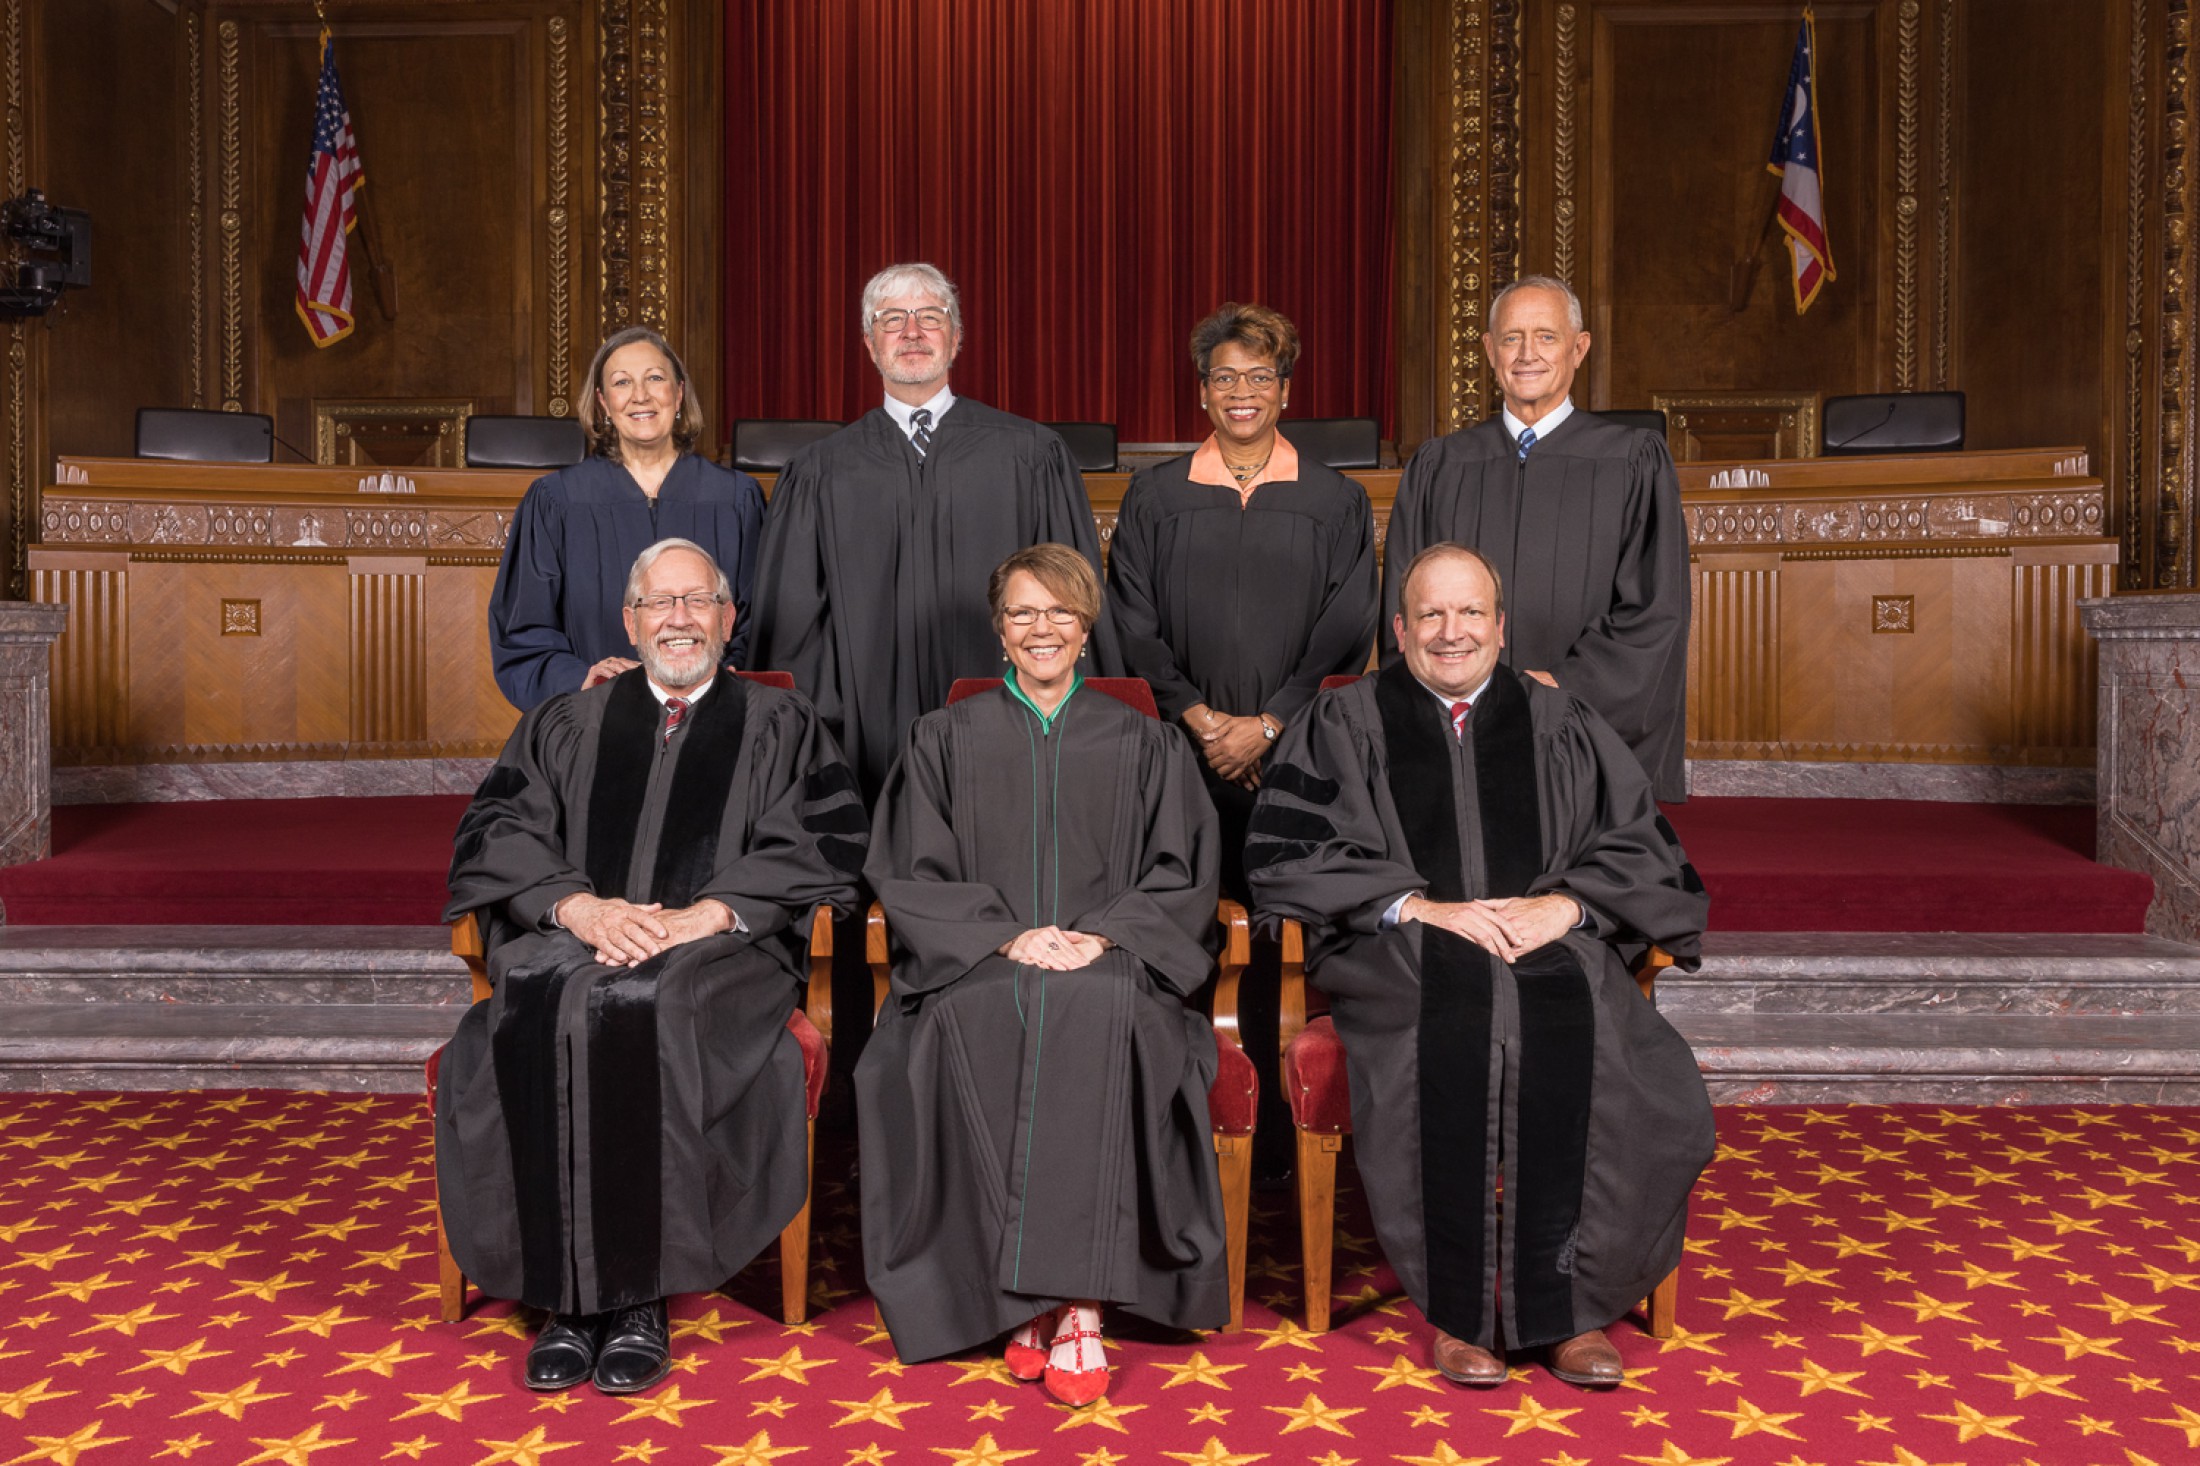 Image of seven men and women, all wearing black judicial robes. Two men and two women are standing and two men and one woman are seated in front of them in the courtroom of the Thomas J. Moyer Ohio Judicial Center.